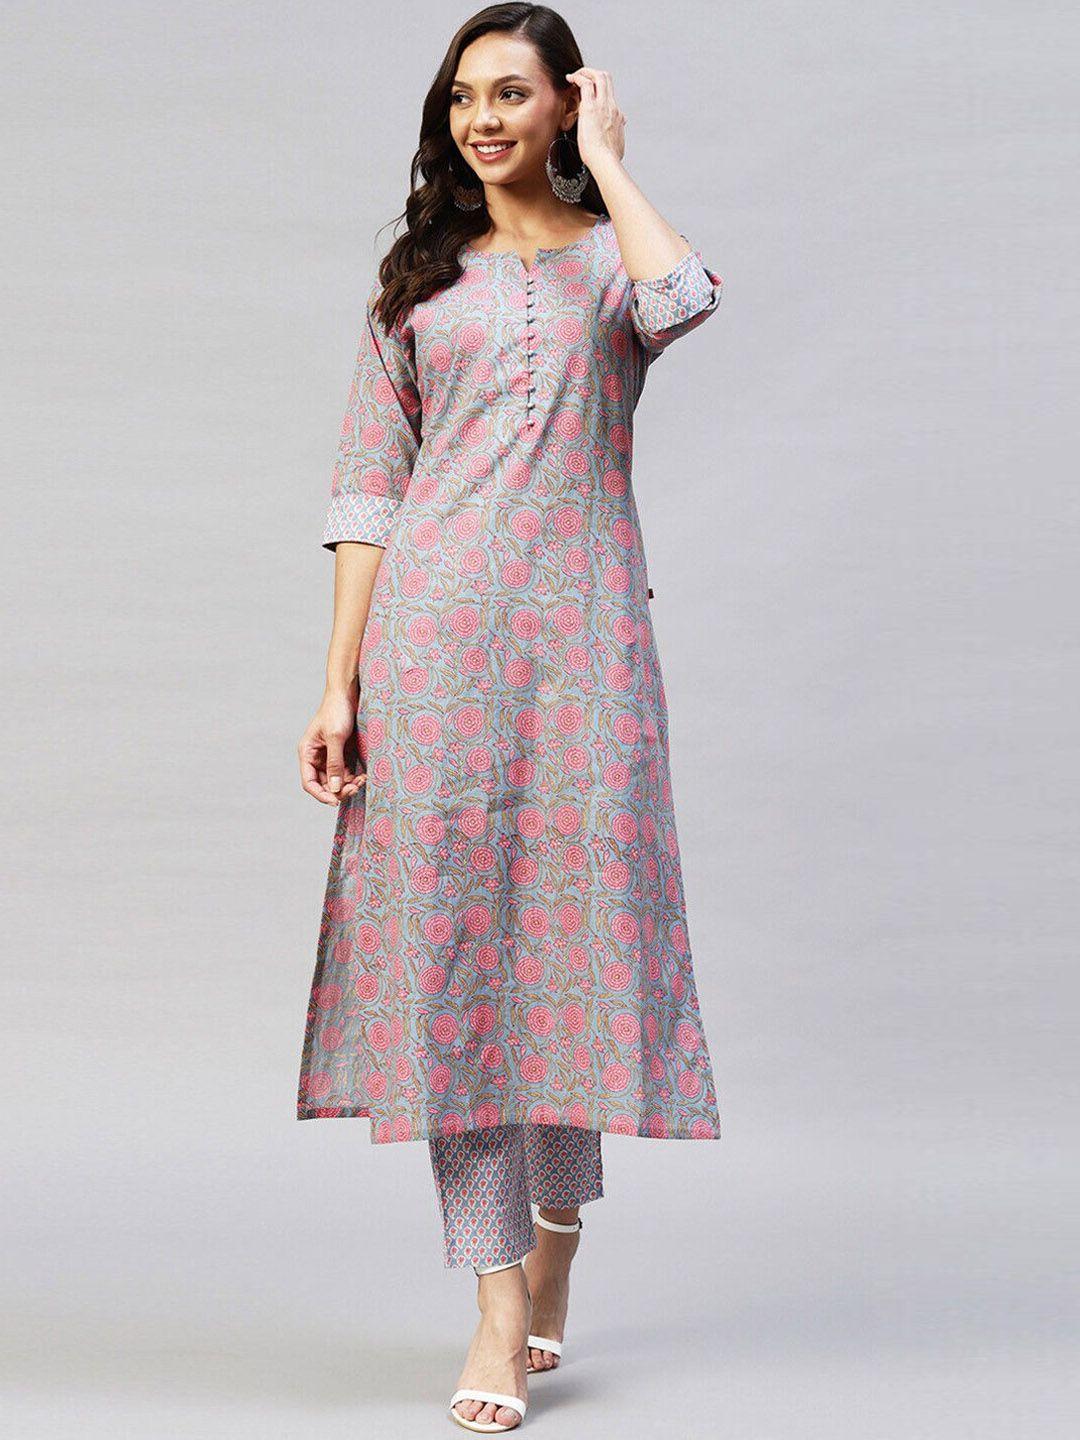 bollyclues women blue floral printed regular pure cotton kurta with trousers